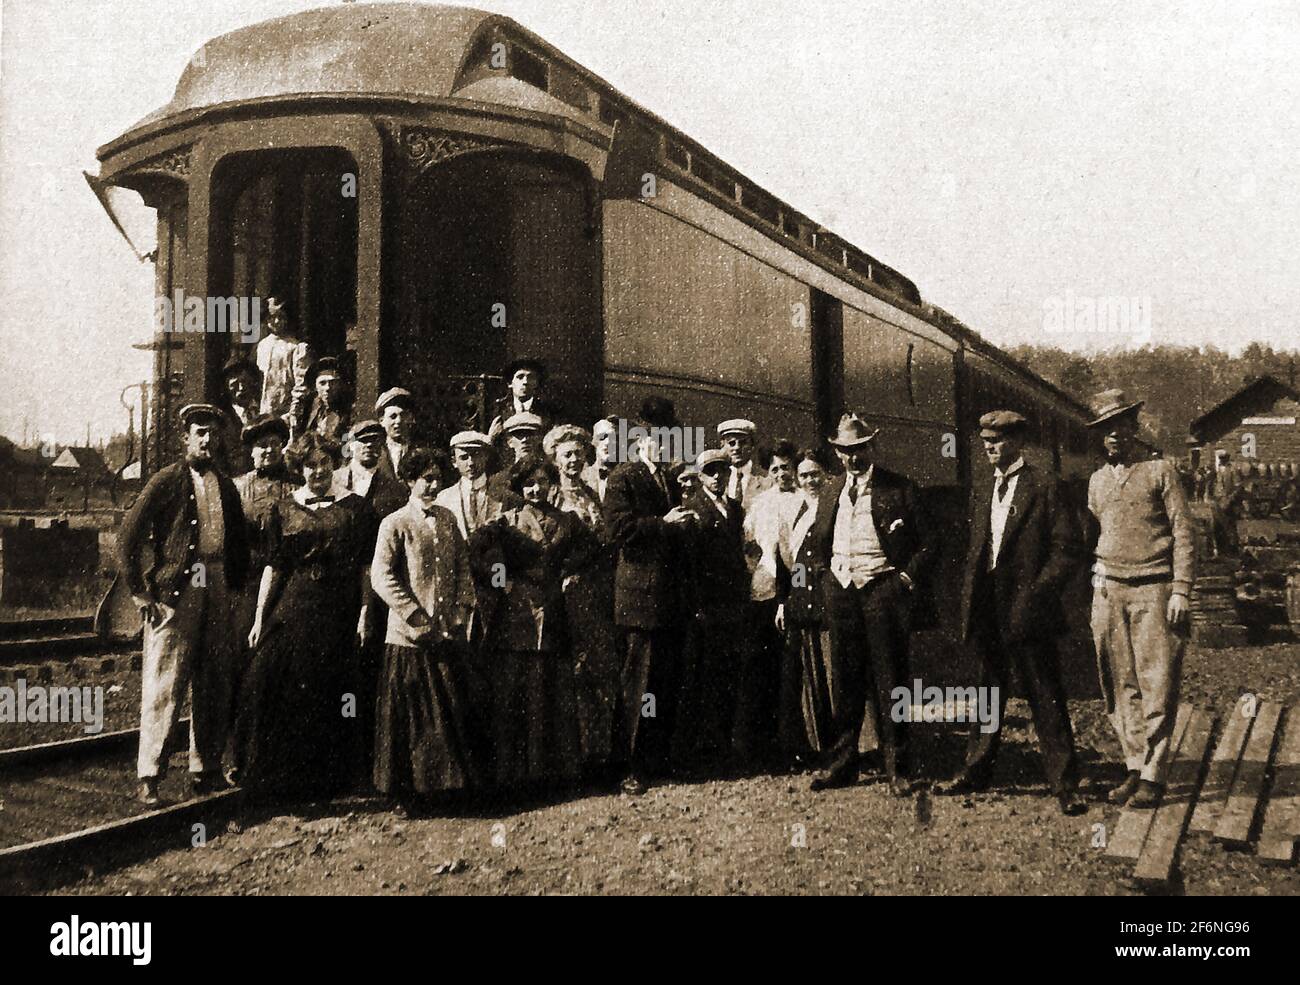 1914 - A moment in the early USA movie industry, This old Amercan photo shows the  Essanay Stock Company railway car used to transport film actors (shown) and props to various locations in the USA. The Essanay Film Manufacturing Company  motion picture studio  was founded in 1907  in Chicago, with a  film lot in Niles Canyon, California. Best known for Charlie Chaplin comedy  films and others that featured  Gloria Swanson, Francis X. Bushman, and studio co-owner  Broncho Billy Anderson. It later merged with other companies that were eventually absorbed by Warner Brothers. Stock Photo